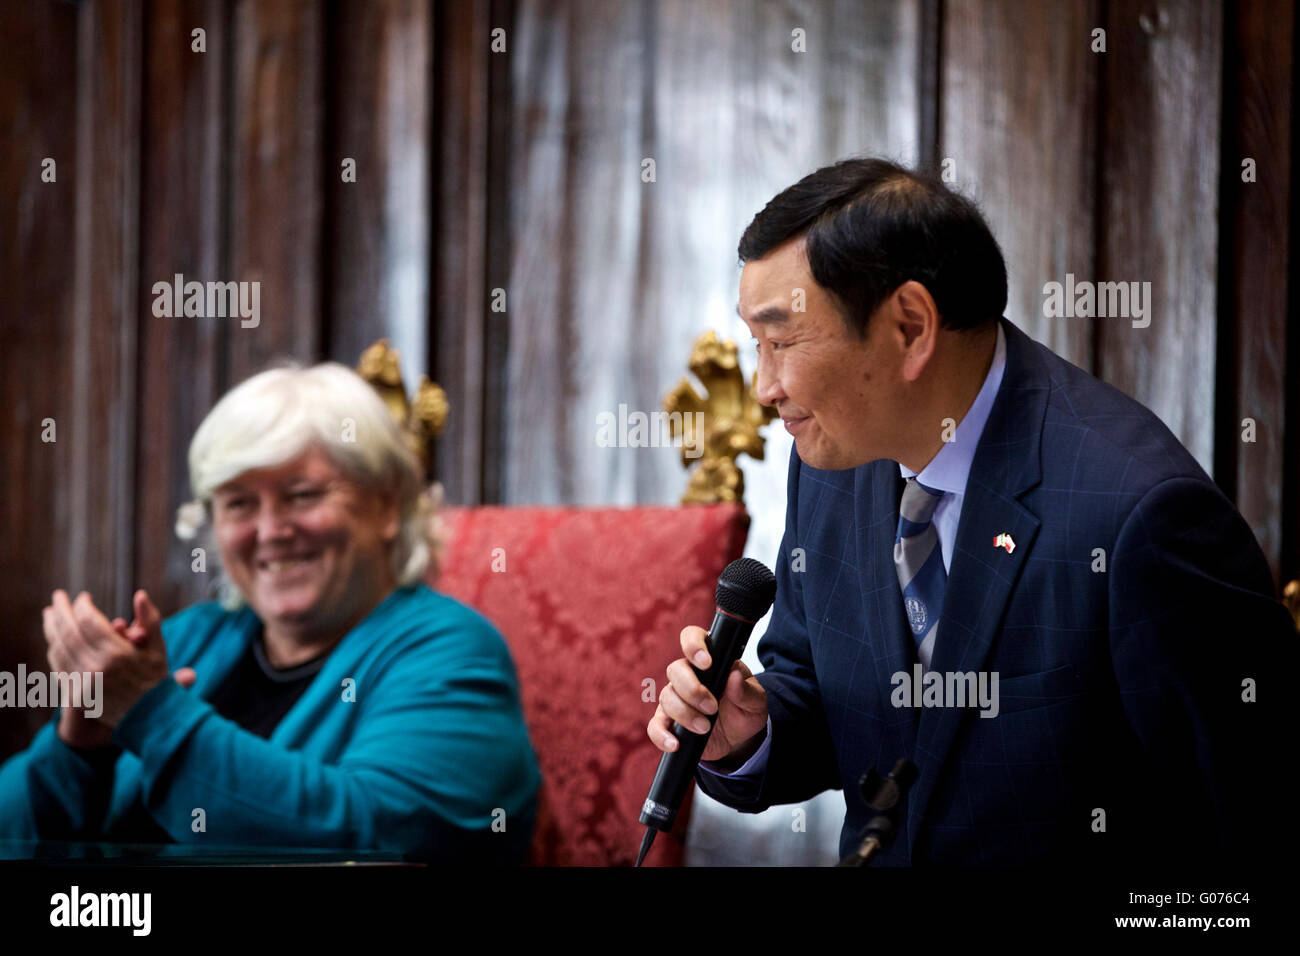 Cagliari, Sardinia of Italy. 29th Apr, 2016. Luo Ping, Chinese counselor of education to Italy, speaks during the Confucius Classroom inauguration ceremony in the University of Cagliari, Sardinia of Italy, on April 29, 2016. © Jin Yu/Xinhua/Alamy Live News Stock Photo